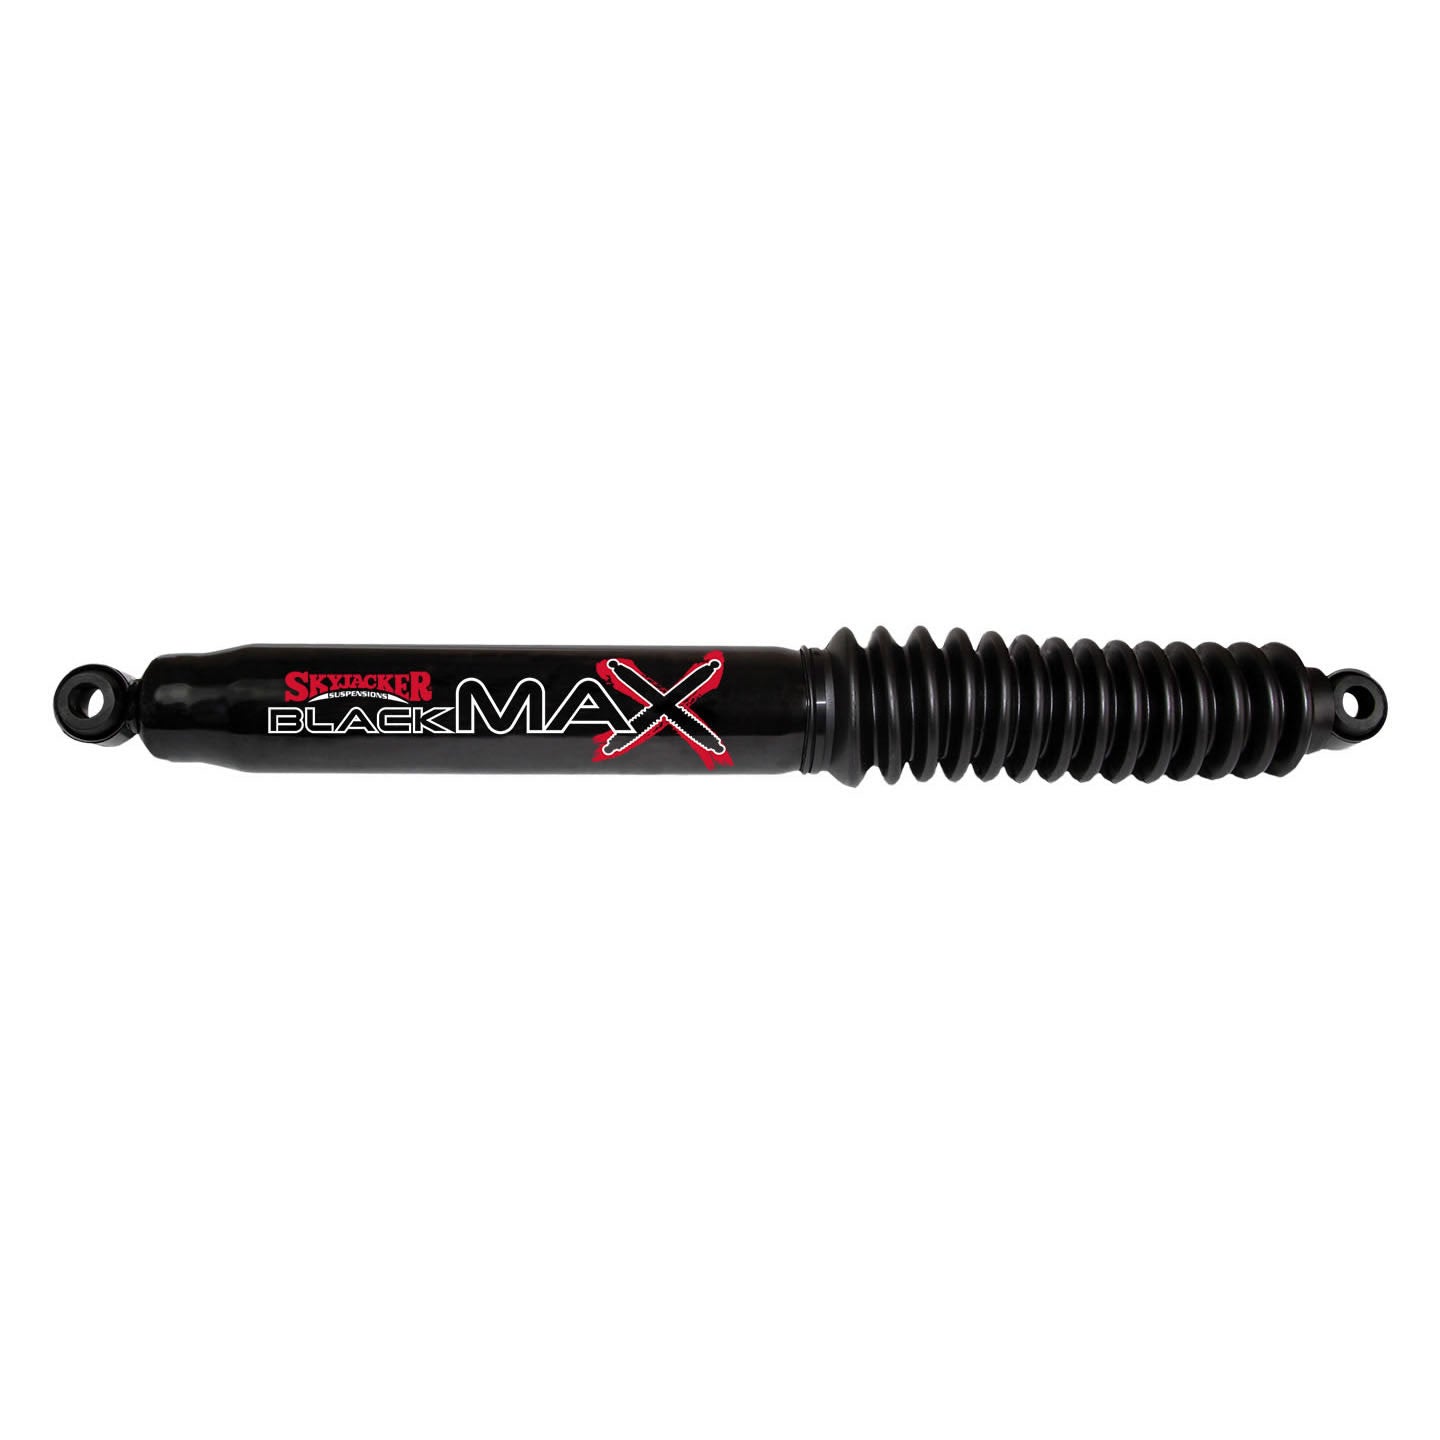 Black MAX Shock Absorber Chevy/Dodge/Ford Truck w/Black Boot 29.83 Inch Extended 17.32 Inch Collapsed Skyjacker